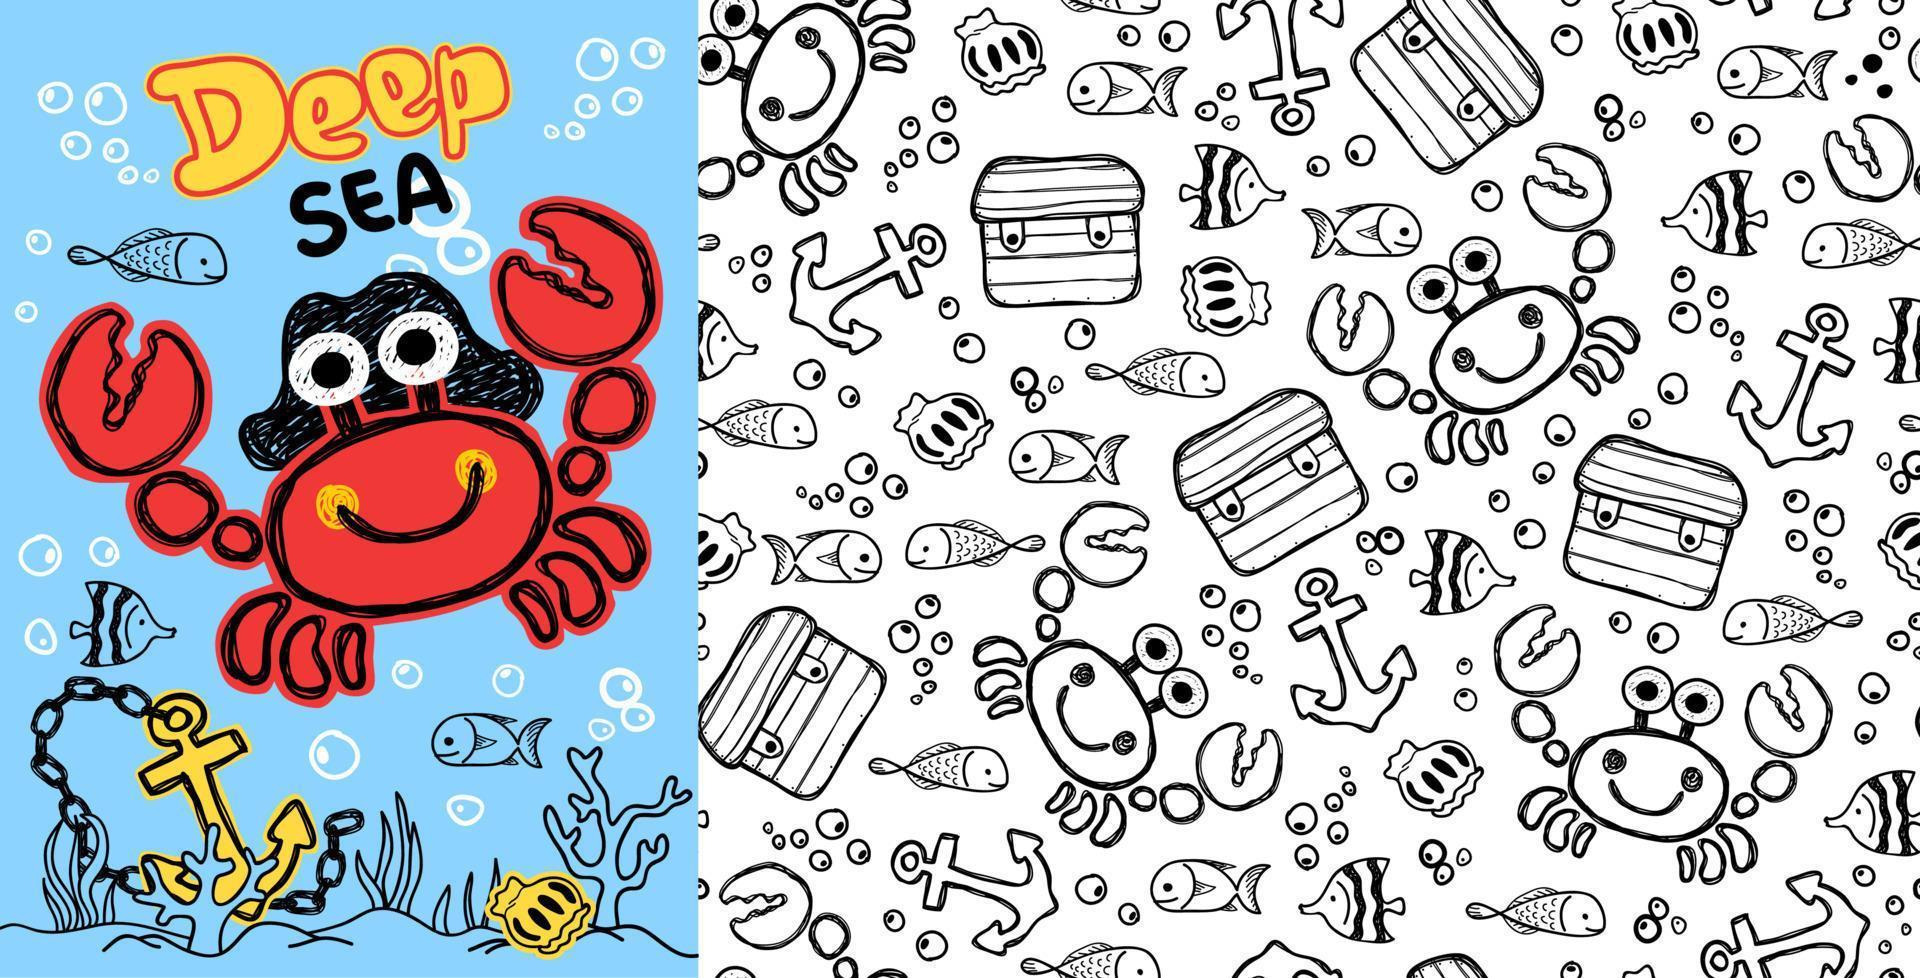 Seamless pattern vector of funny crab cartoon wearing pirate hat with marine life illustration.